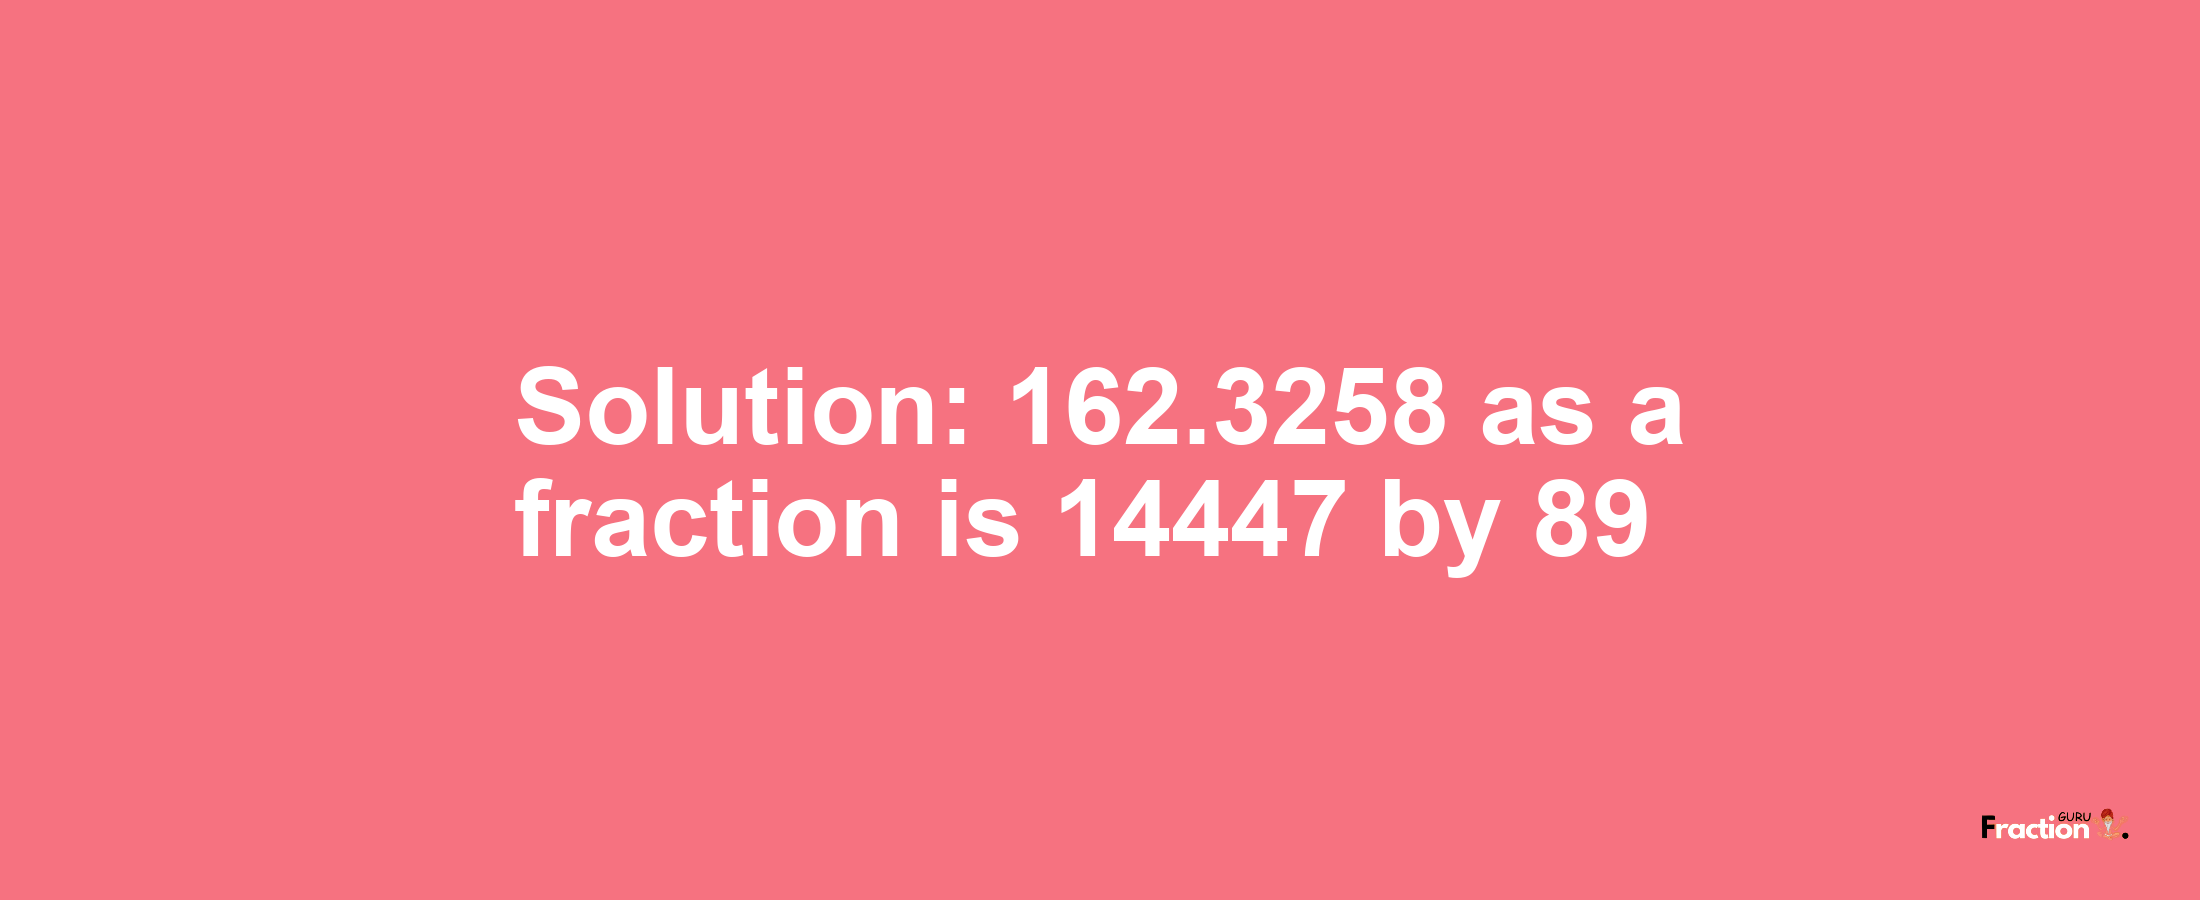 Solution:162.3258 as a fraction is 14447/89